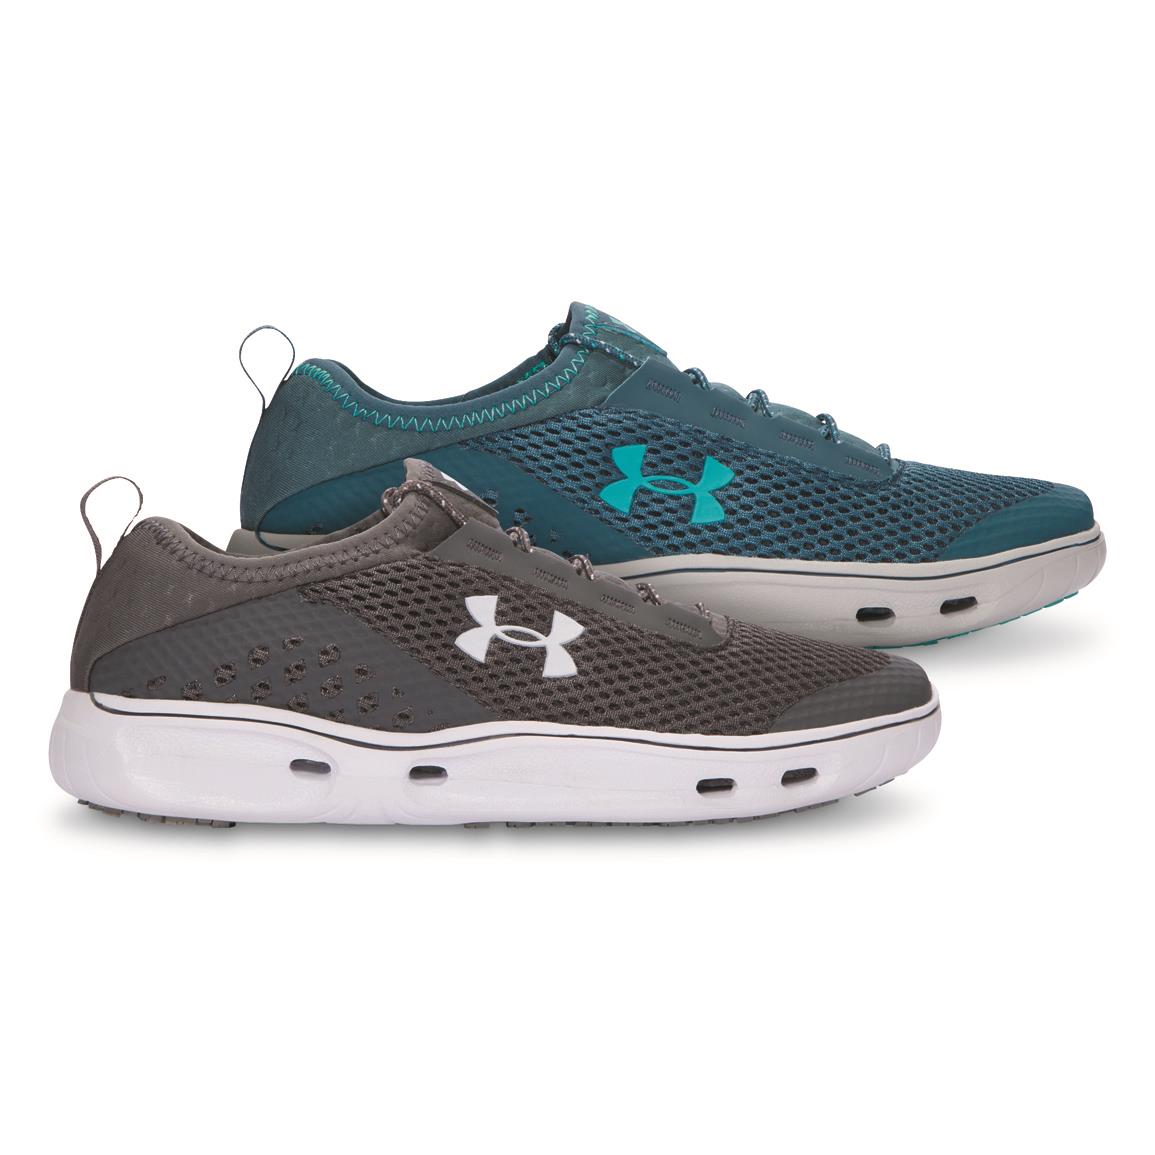 Under Armour Women's Kilchis Water Shoes 676722, Boat